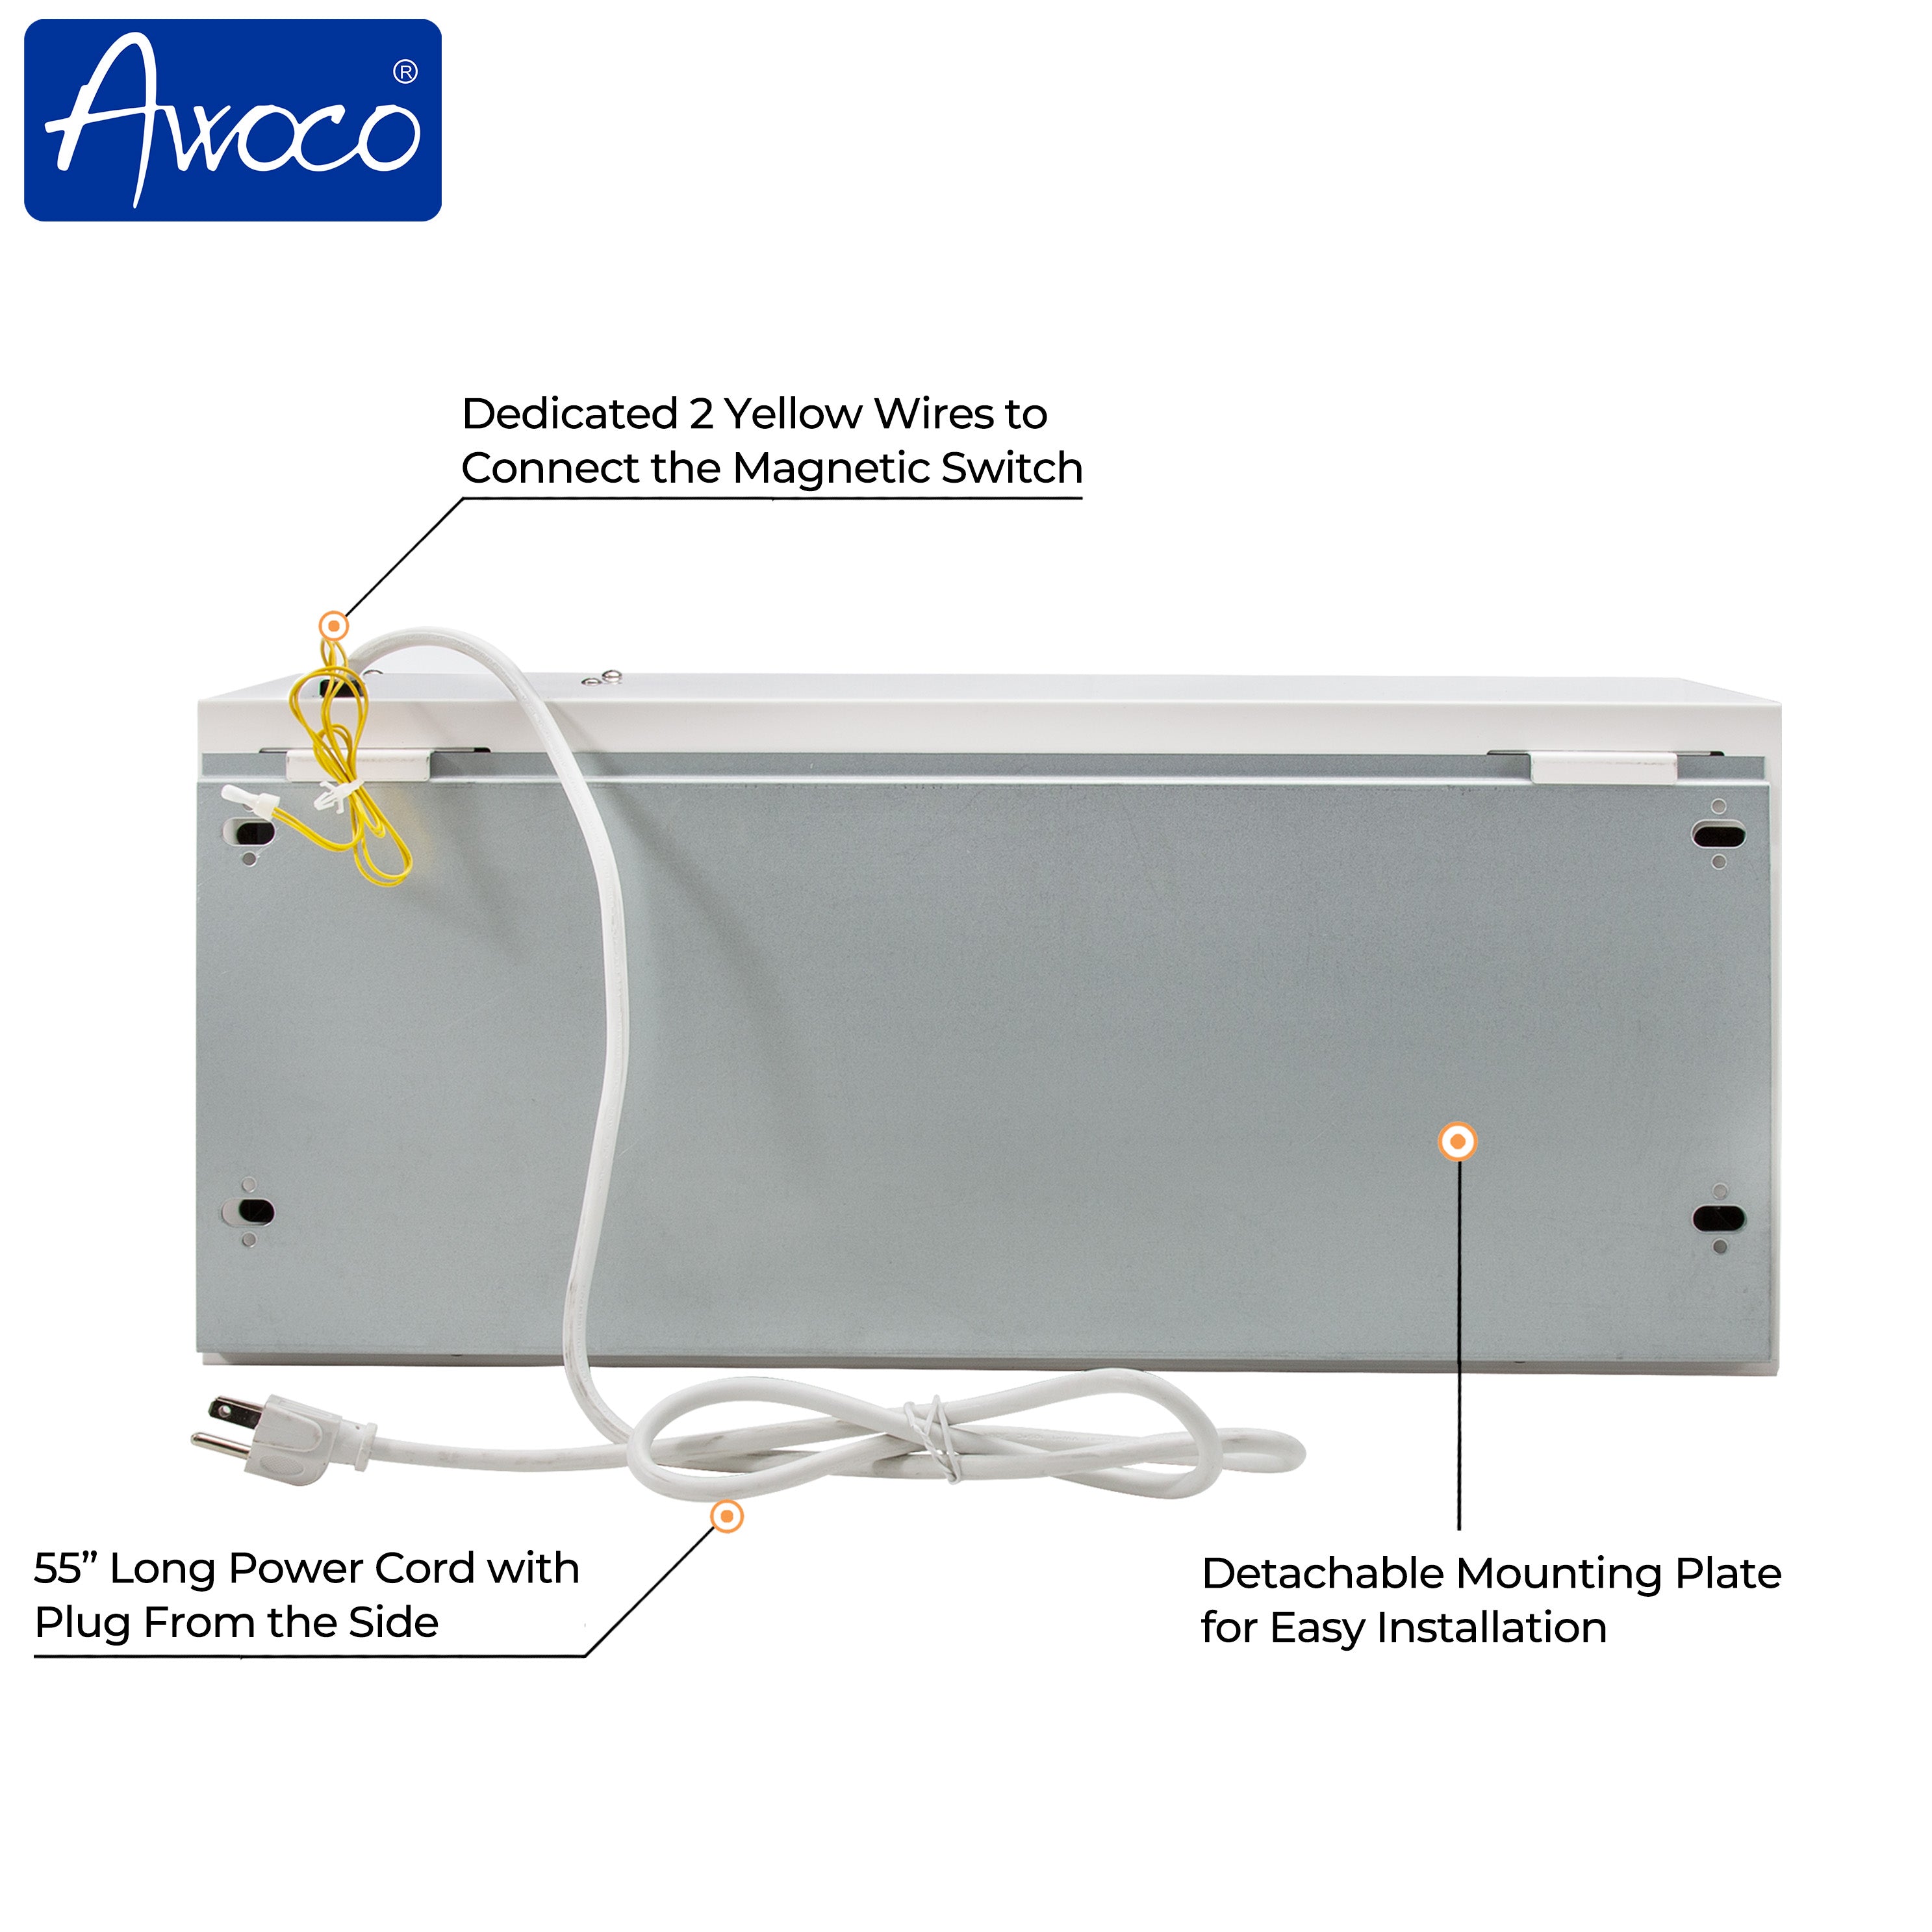 Awoco 24” Super Power 2 Speeds 800 CFM Commercial Indoor Air Curtain, CE Certified, 120V Unheated with Shutoff Delay Magnetic Switch for Swinging Doors